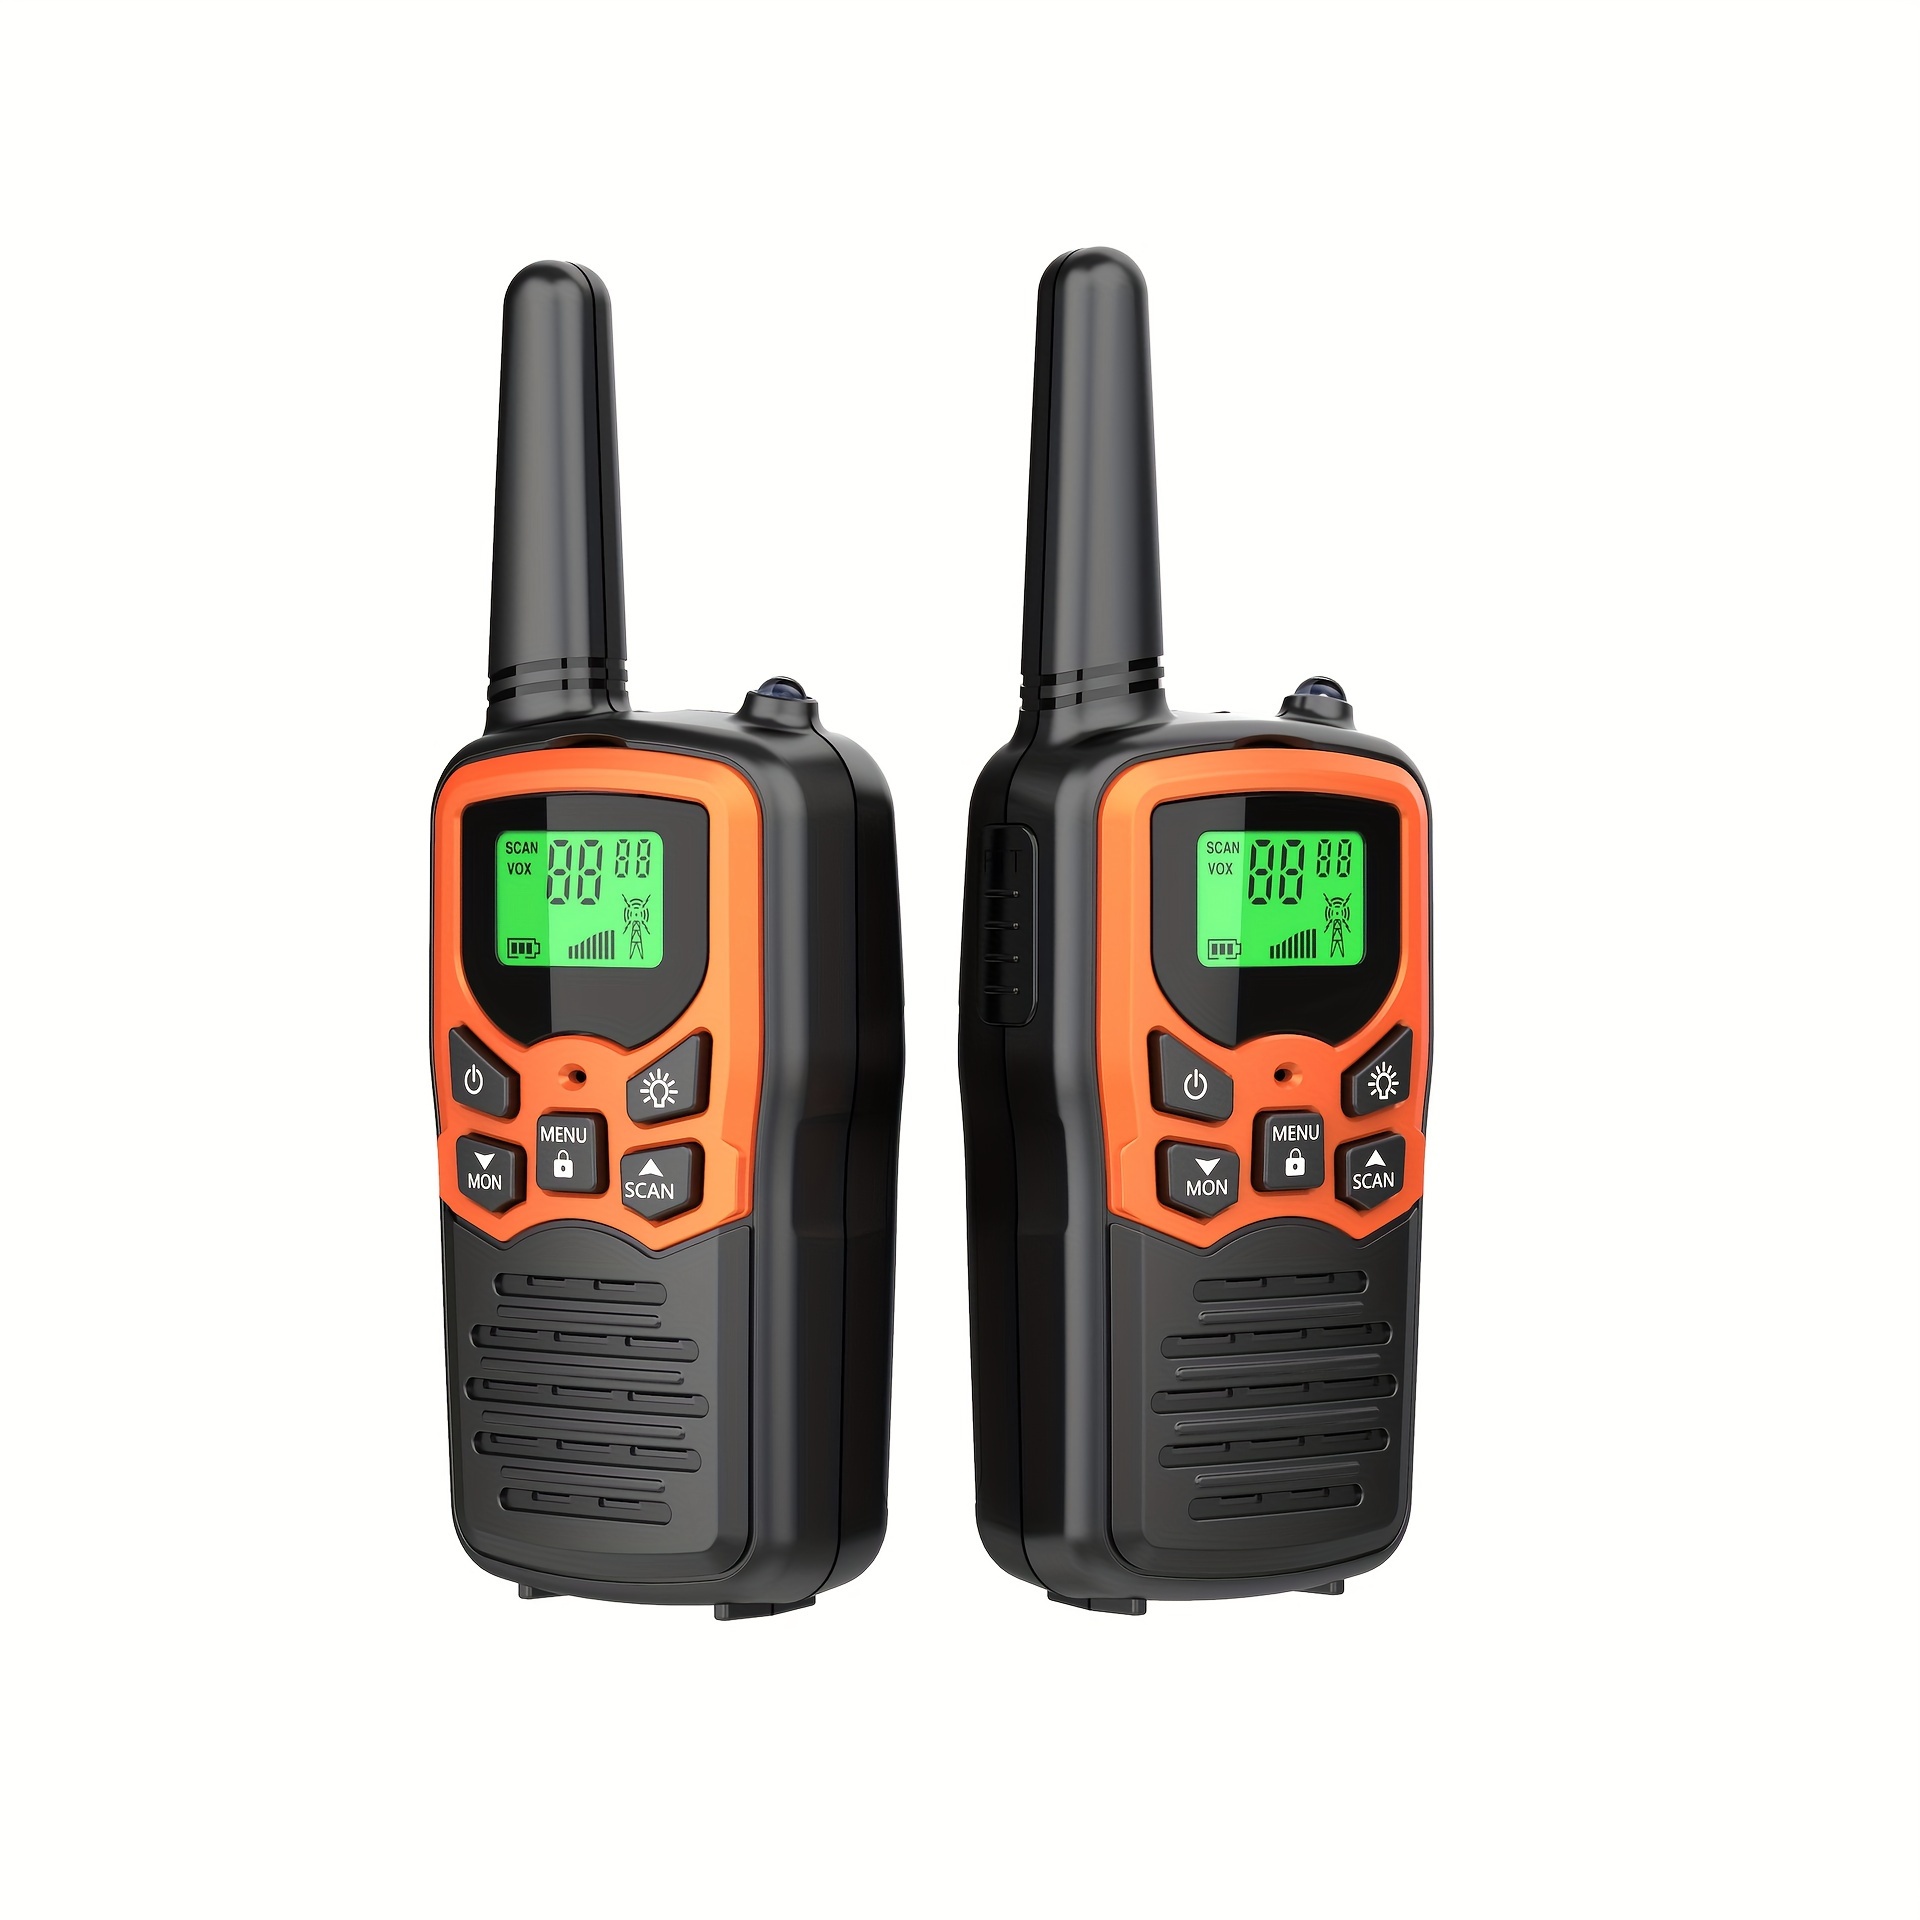 Retevis RT68 Walkie Talkies for Adults, 2 Way Radios Long Range, Hands  Free, 1200mAh Battery, Portable Walkie Talkie Rechargeable with USB  Charging